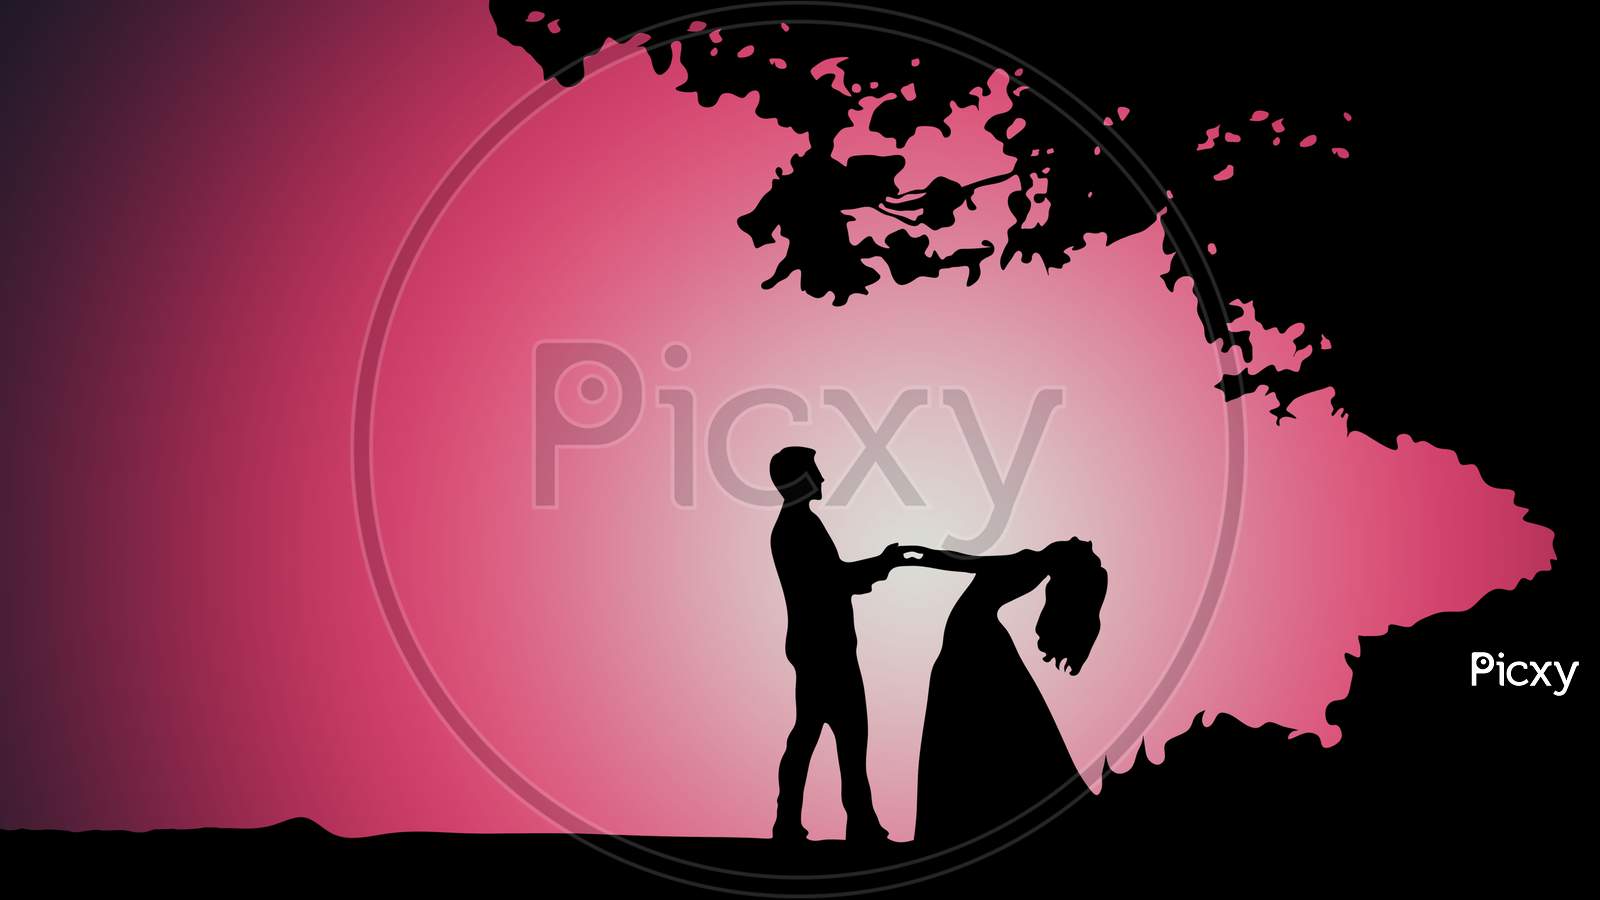 Valentine Day Illustration With Couple Dancing In Silhouette And Gradient Of Moon And Pink Color In Background